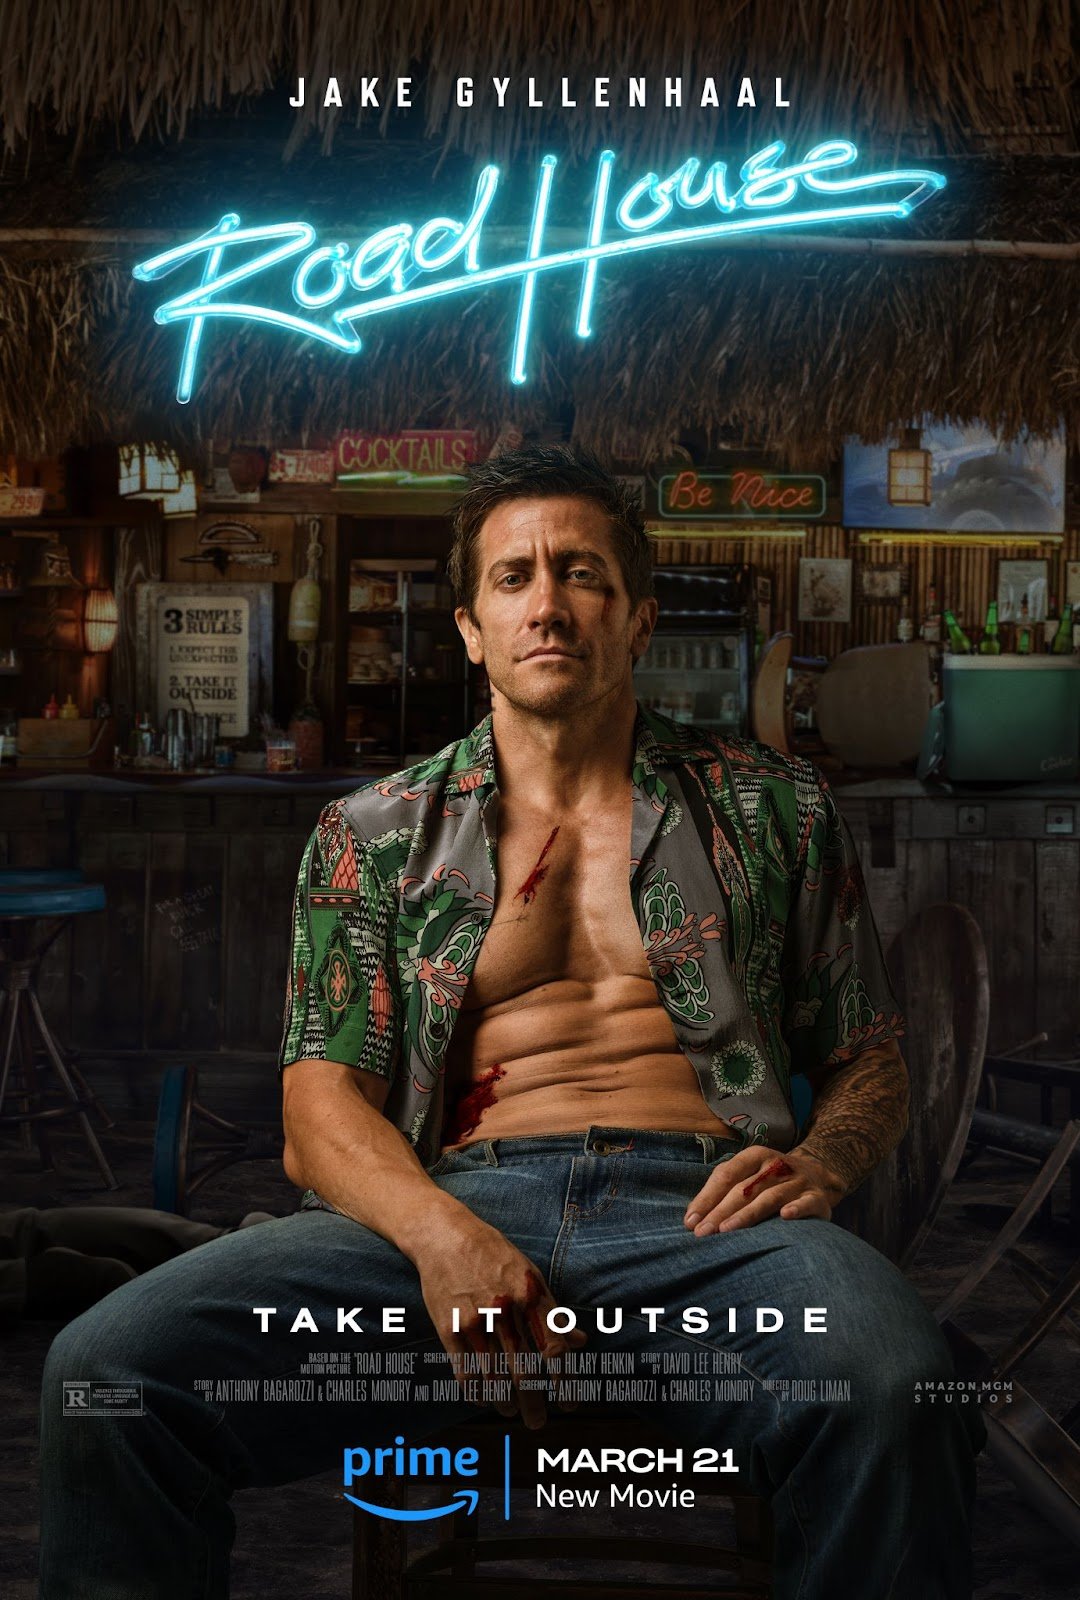 ROAD HOUSE directed by Doug Liman, starring Jake Gyllenhaal, Conor